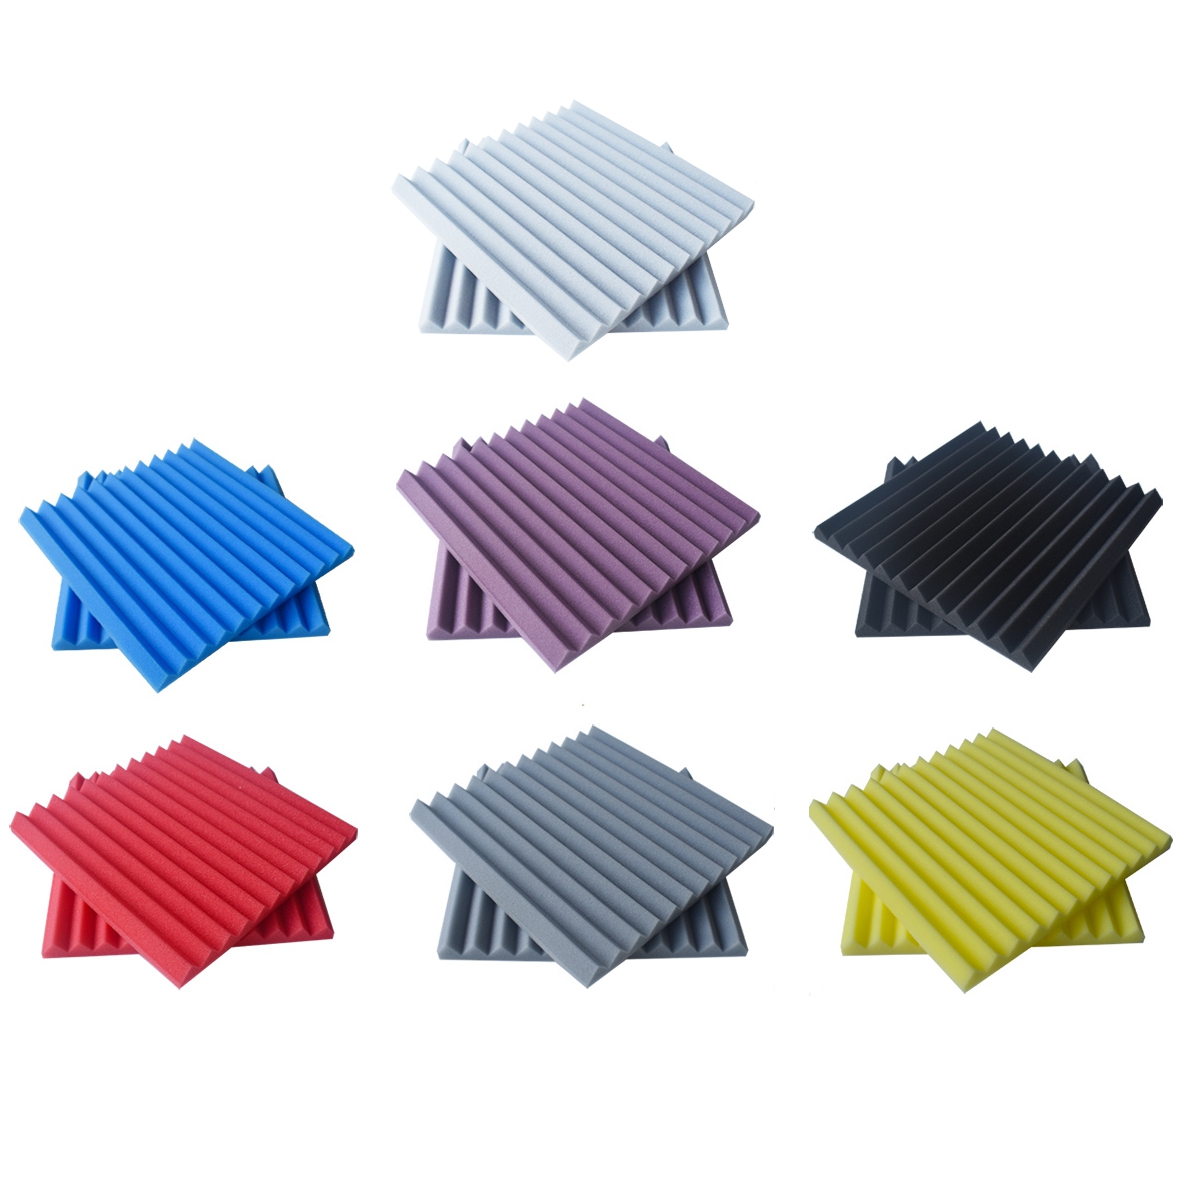 Find 6PCS Acoustic Foam Panel Sound Stop Absorption Sponge Studio KTV Home 25x25x3cm for Sale on Gipsybee.com with cryptocurrencies